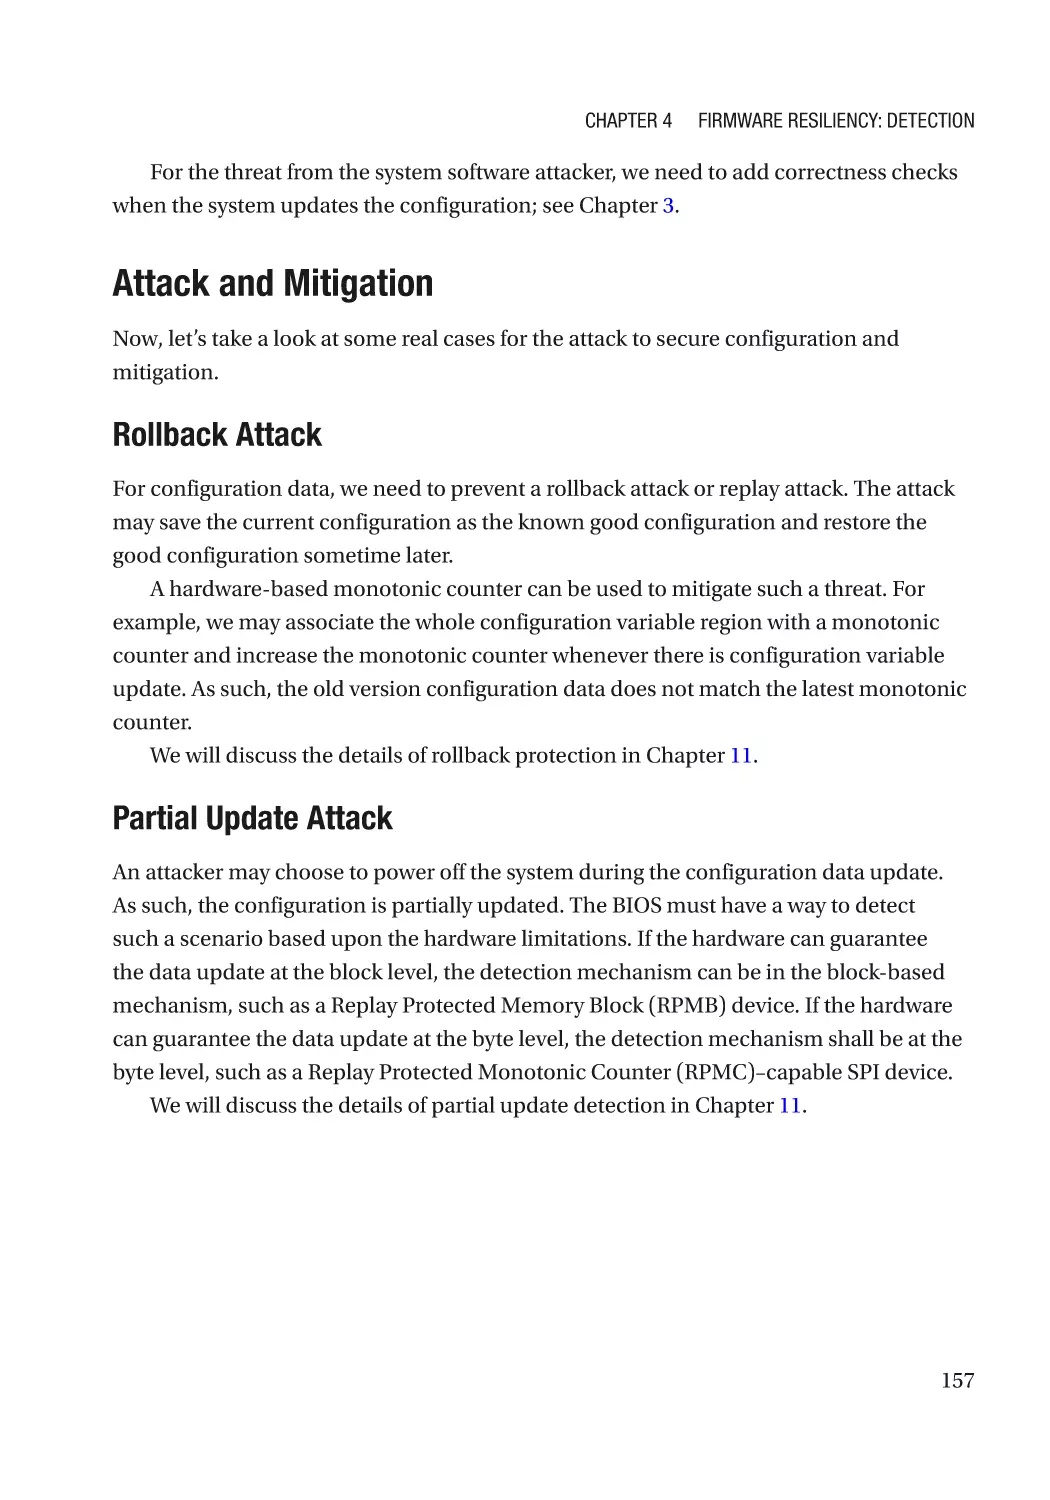 Attack and Mitigation
Rollback Attack
Partial Update Attack